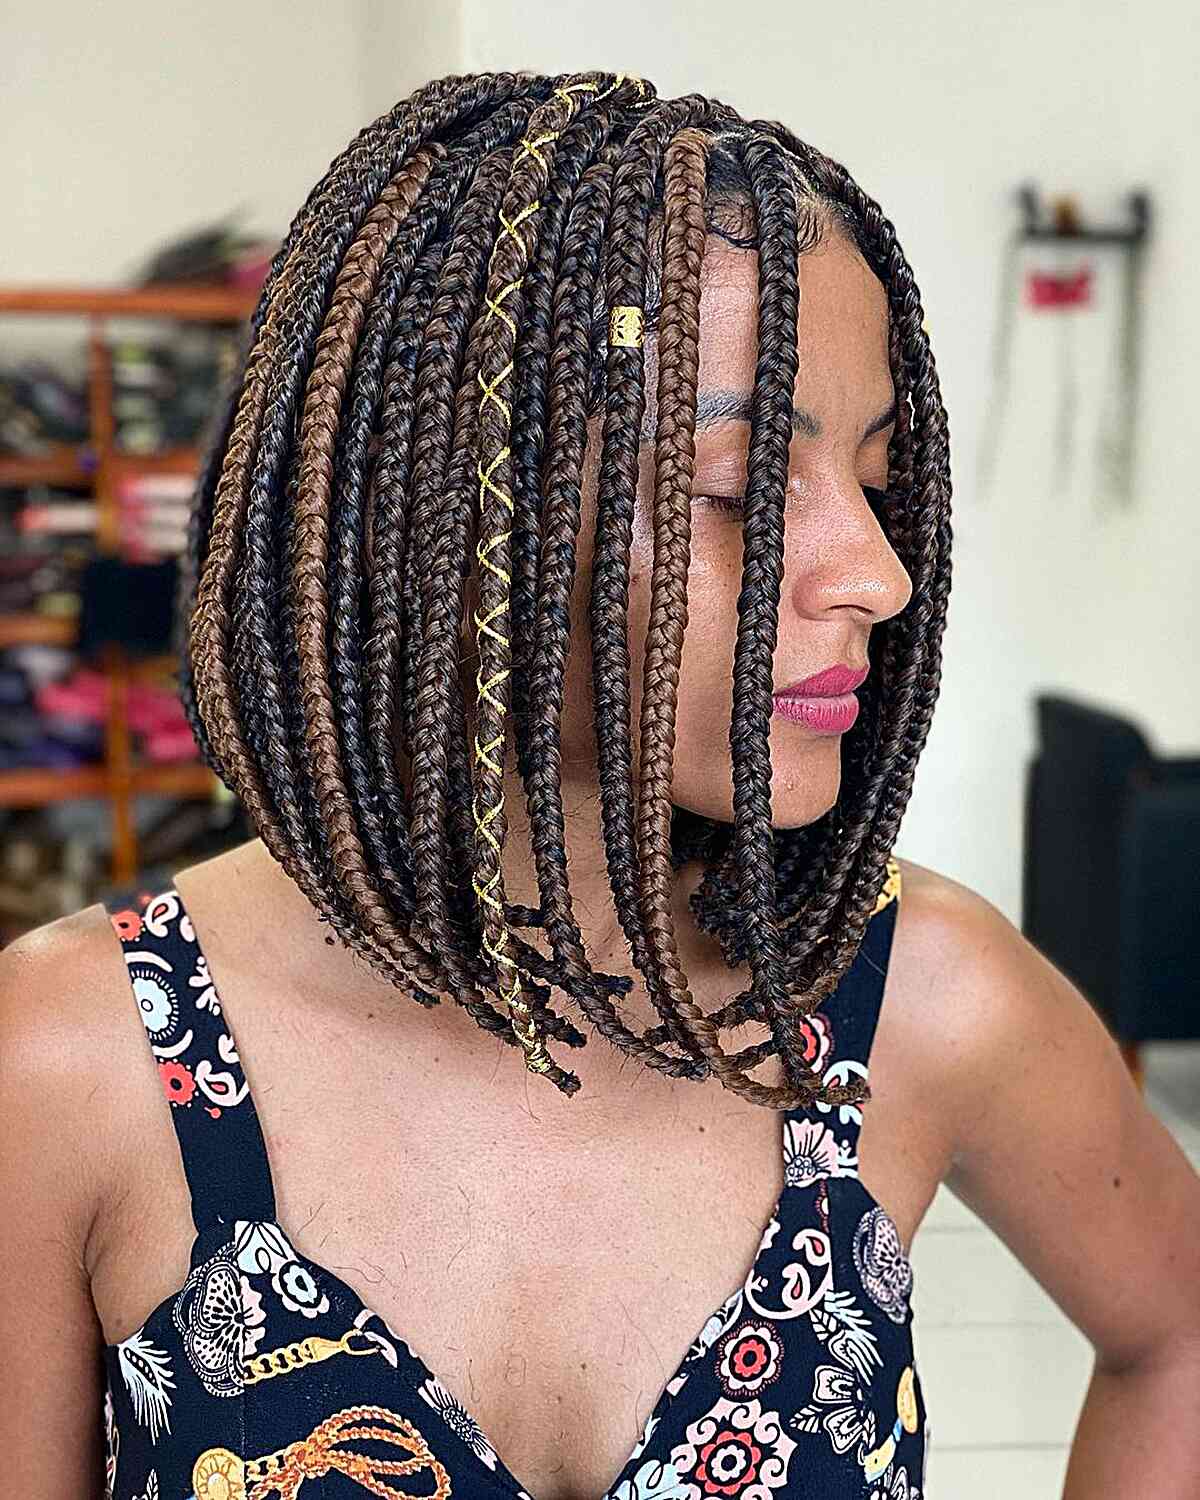 Chunky Box Braids with Ribbon Accents and Cuffs on a Bob Cut